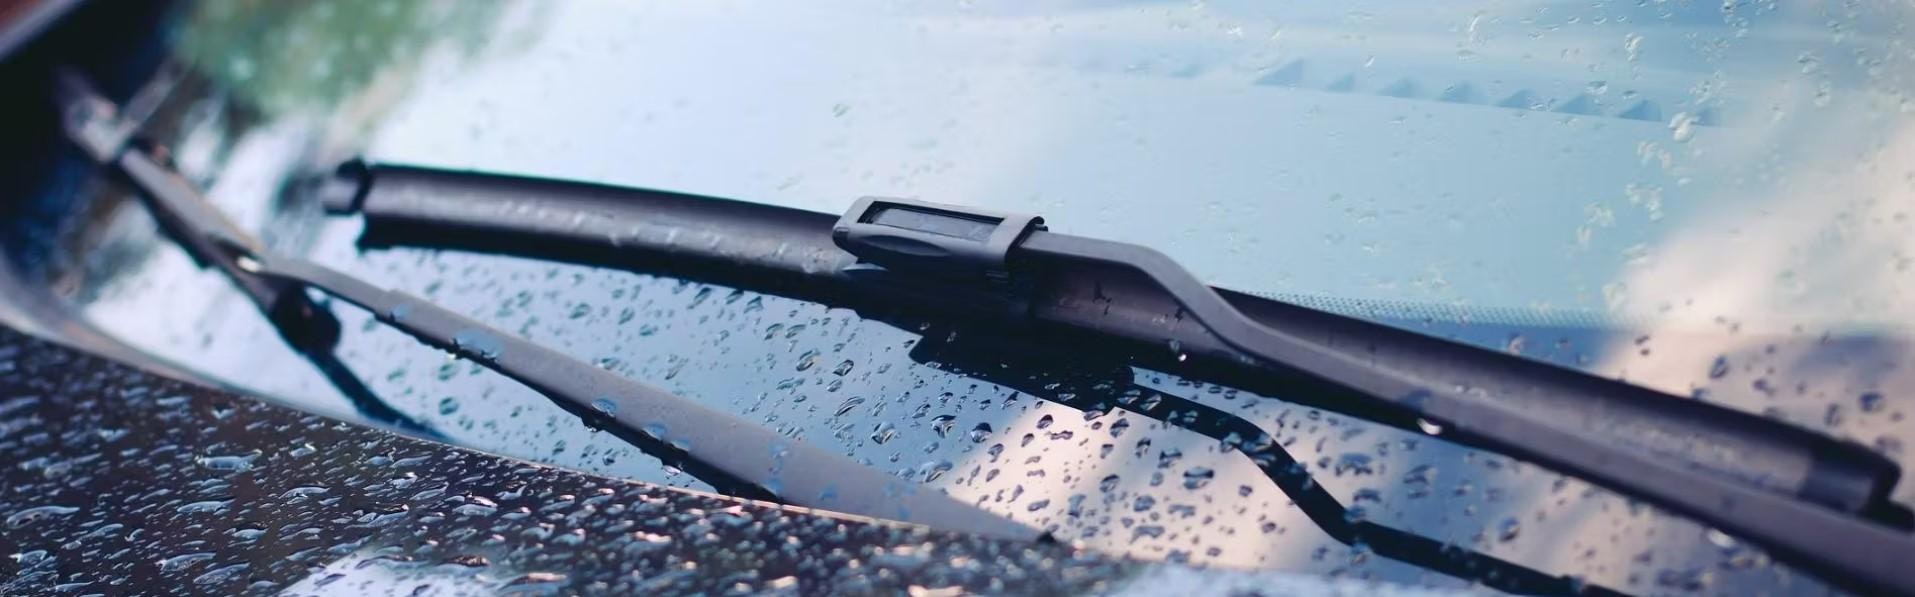 What wiper blades do I need?